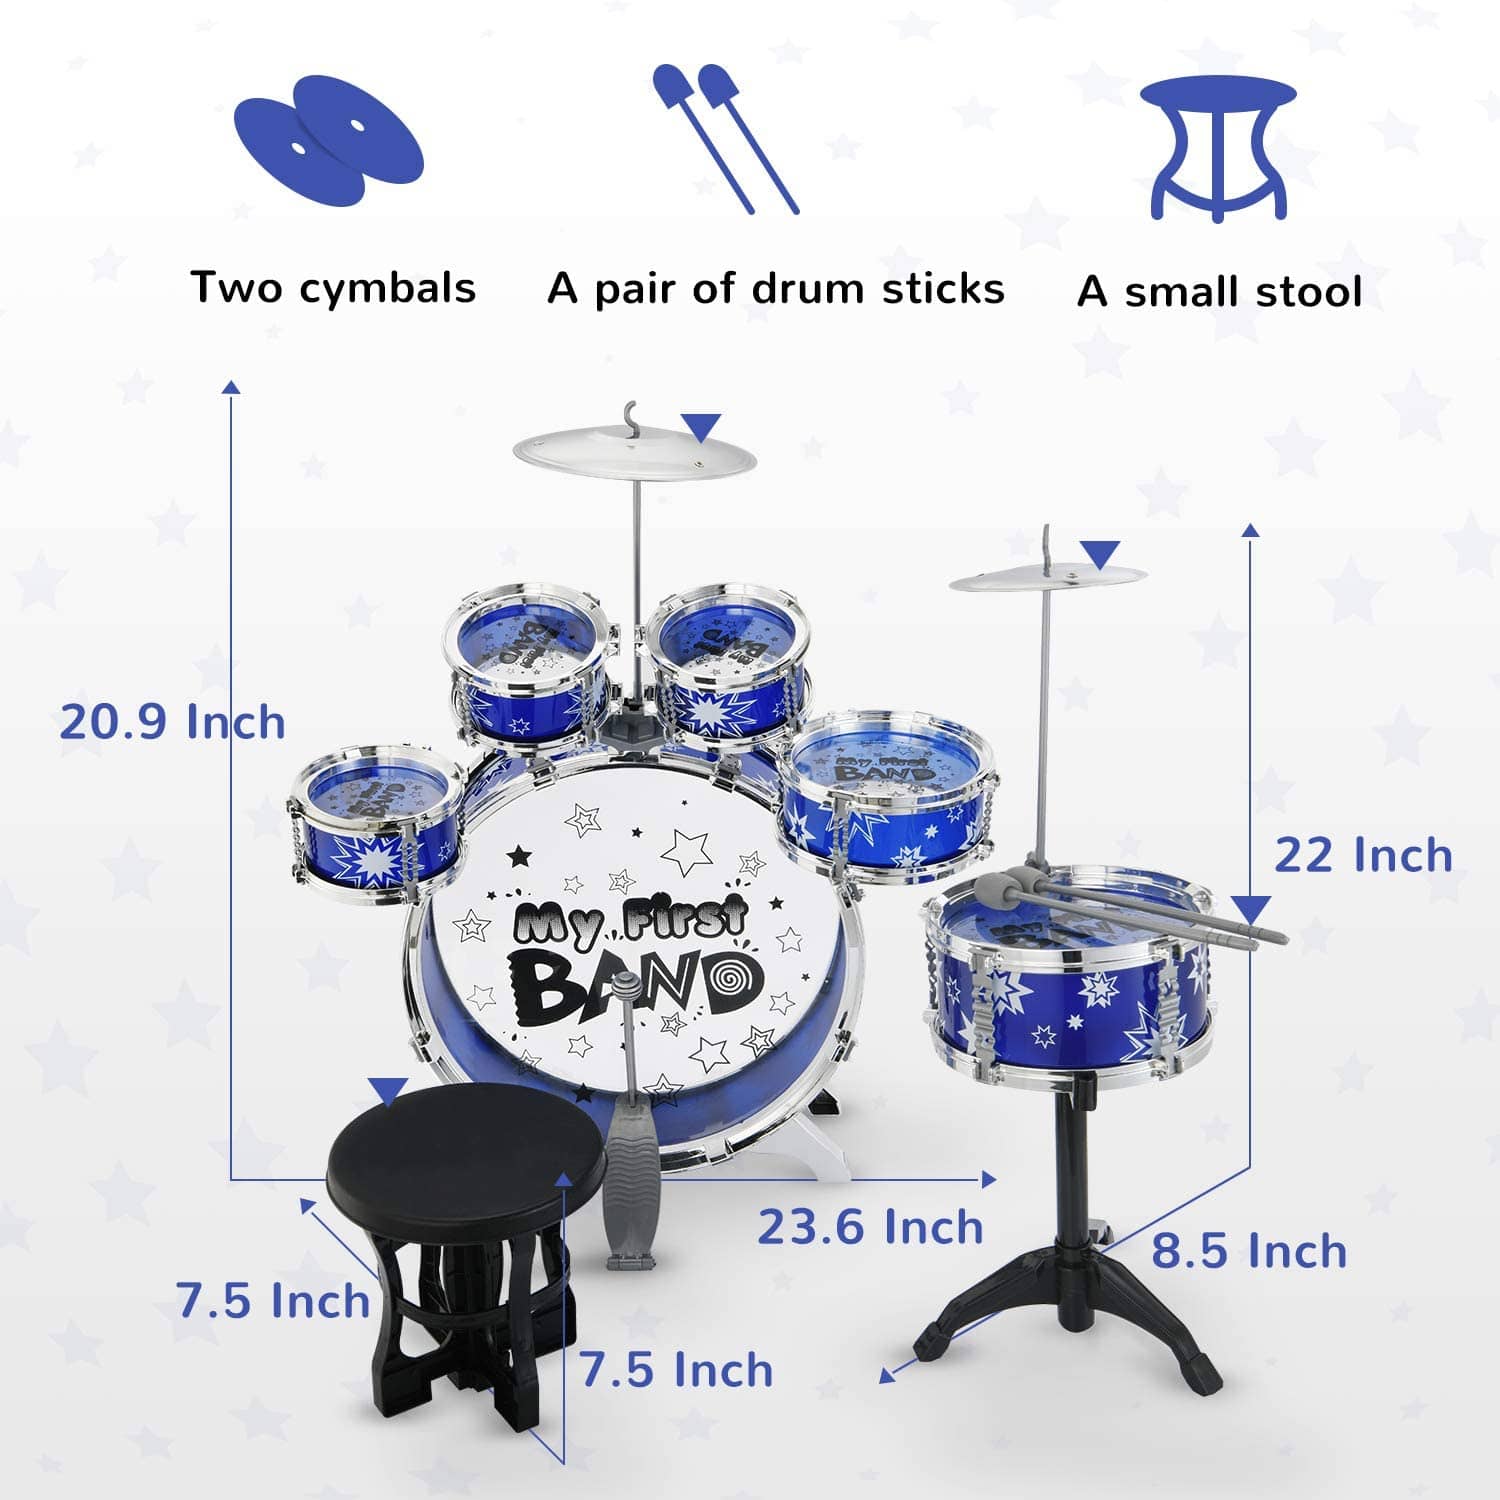 Reditmo Kids Jazz Drum Set, 6 Drums, 2 Cymbals, Chair, Kick Pedal, 2 Drumsticks, Stool, Early Education Musical Instrument to Develop Children’s Creativity, Red 17